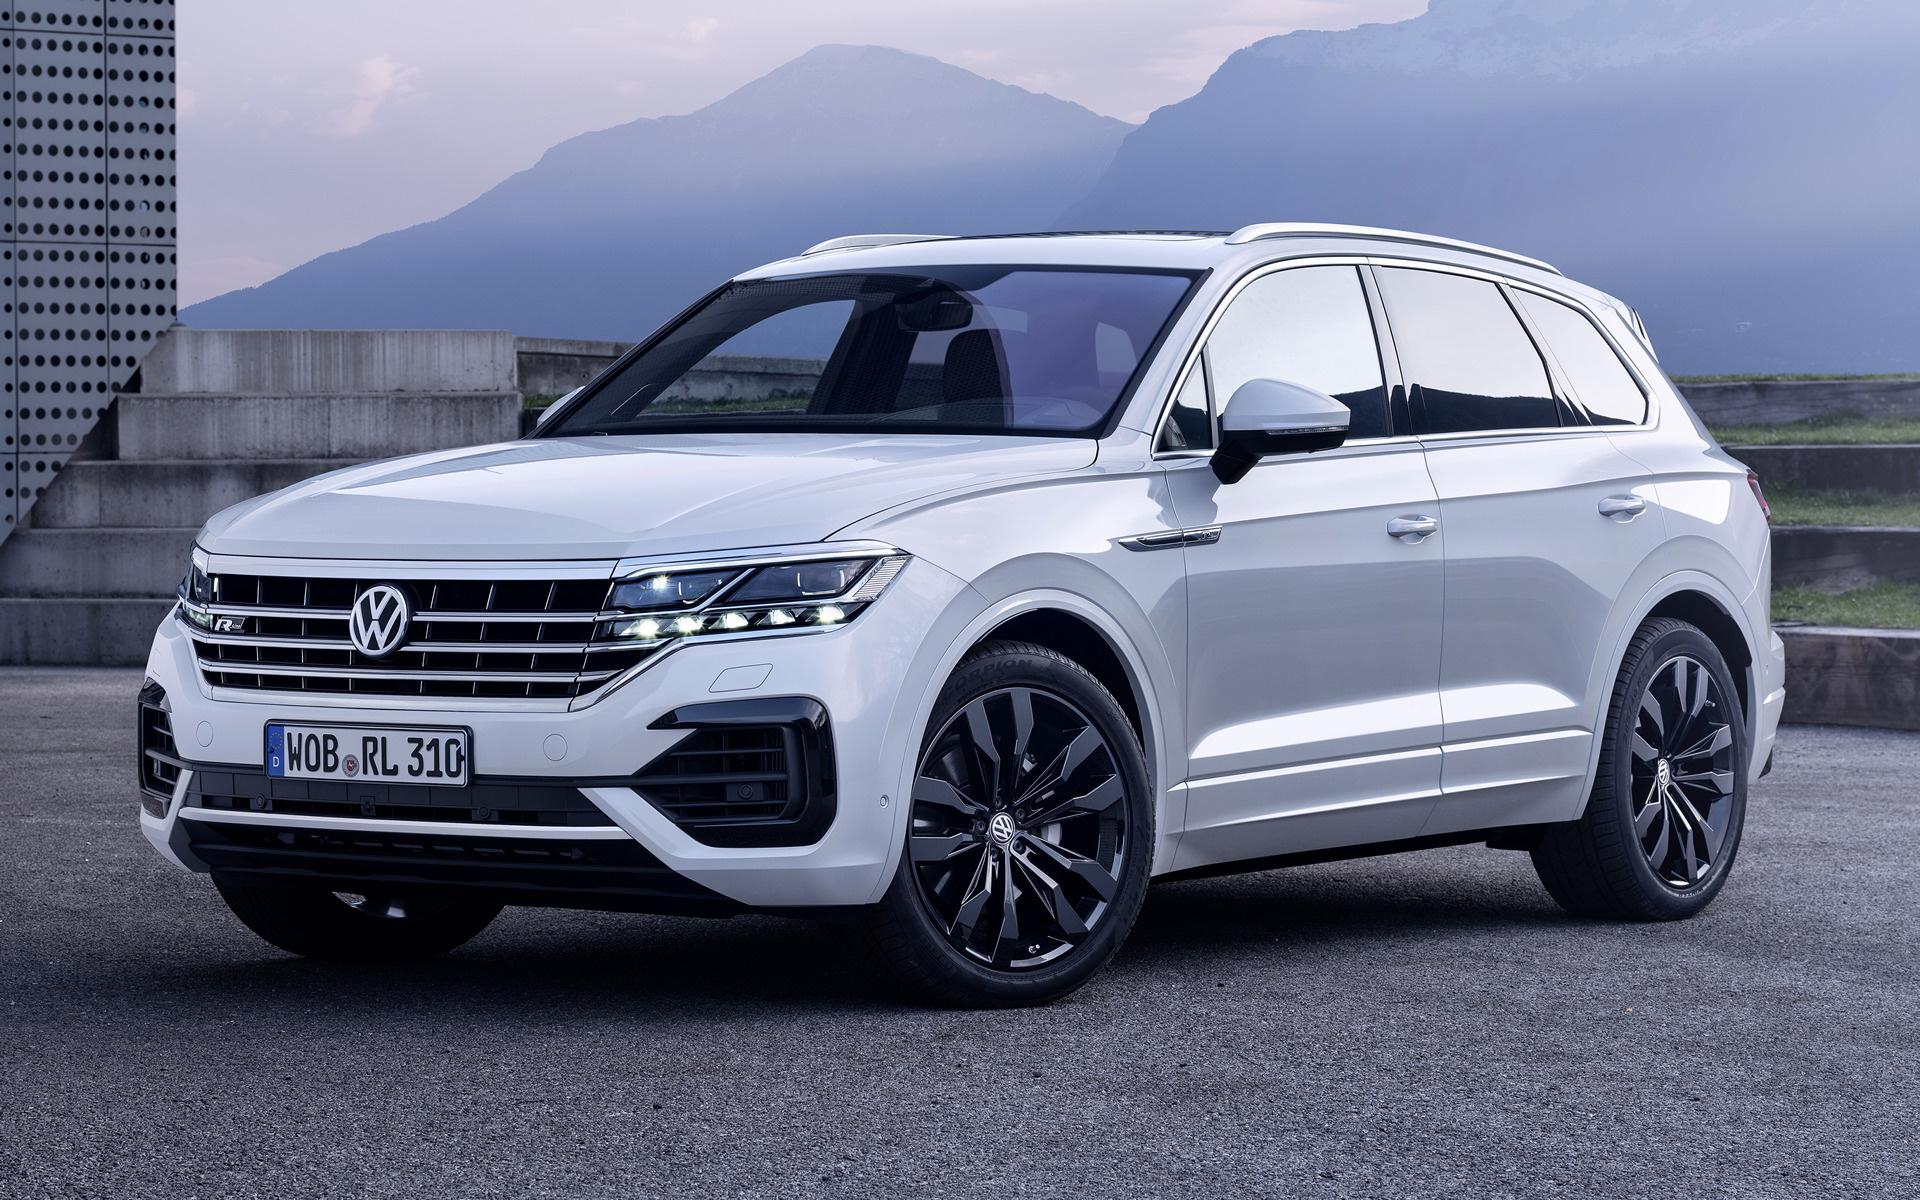 2022 Volkswagen Touareg R Line Wallpapers and HD Images 